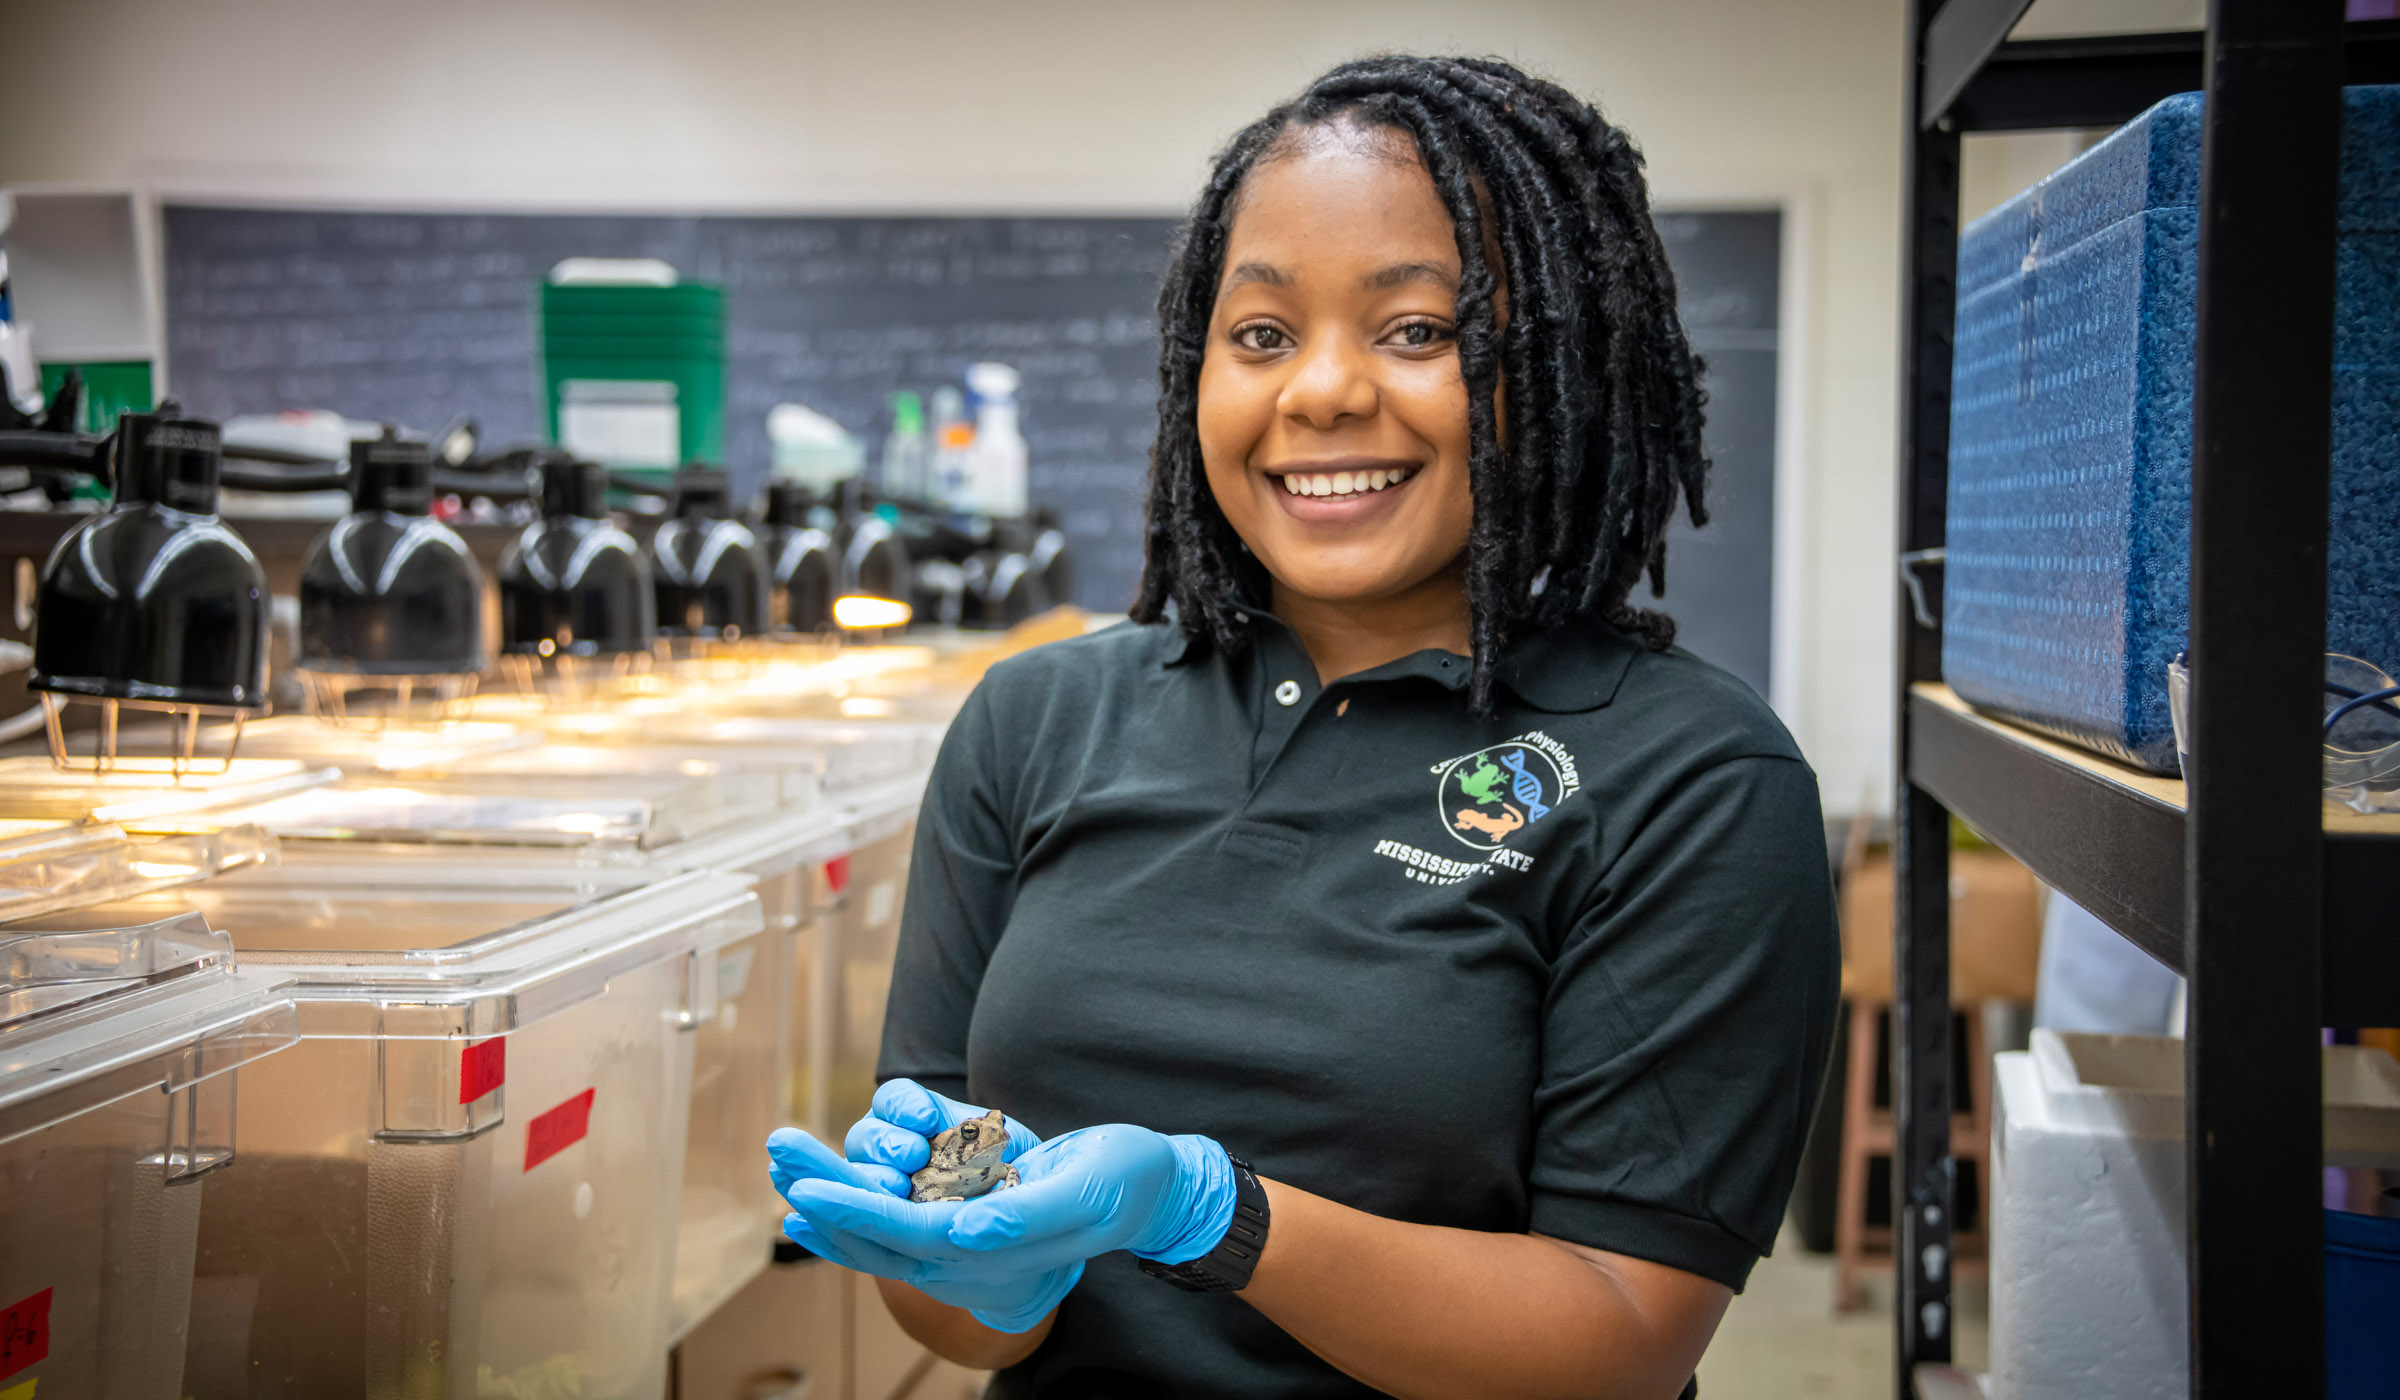 Namia Stevenson, pictured holding a frog in a lab setting.